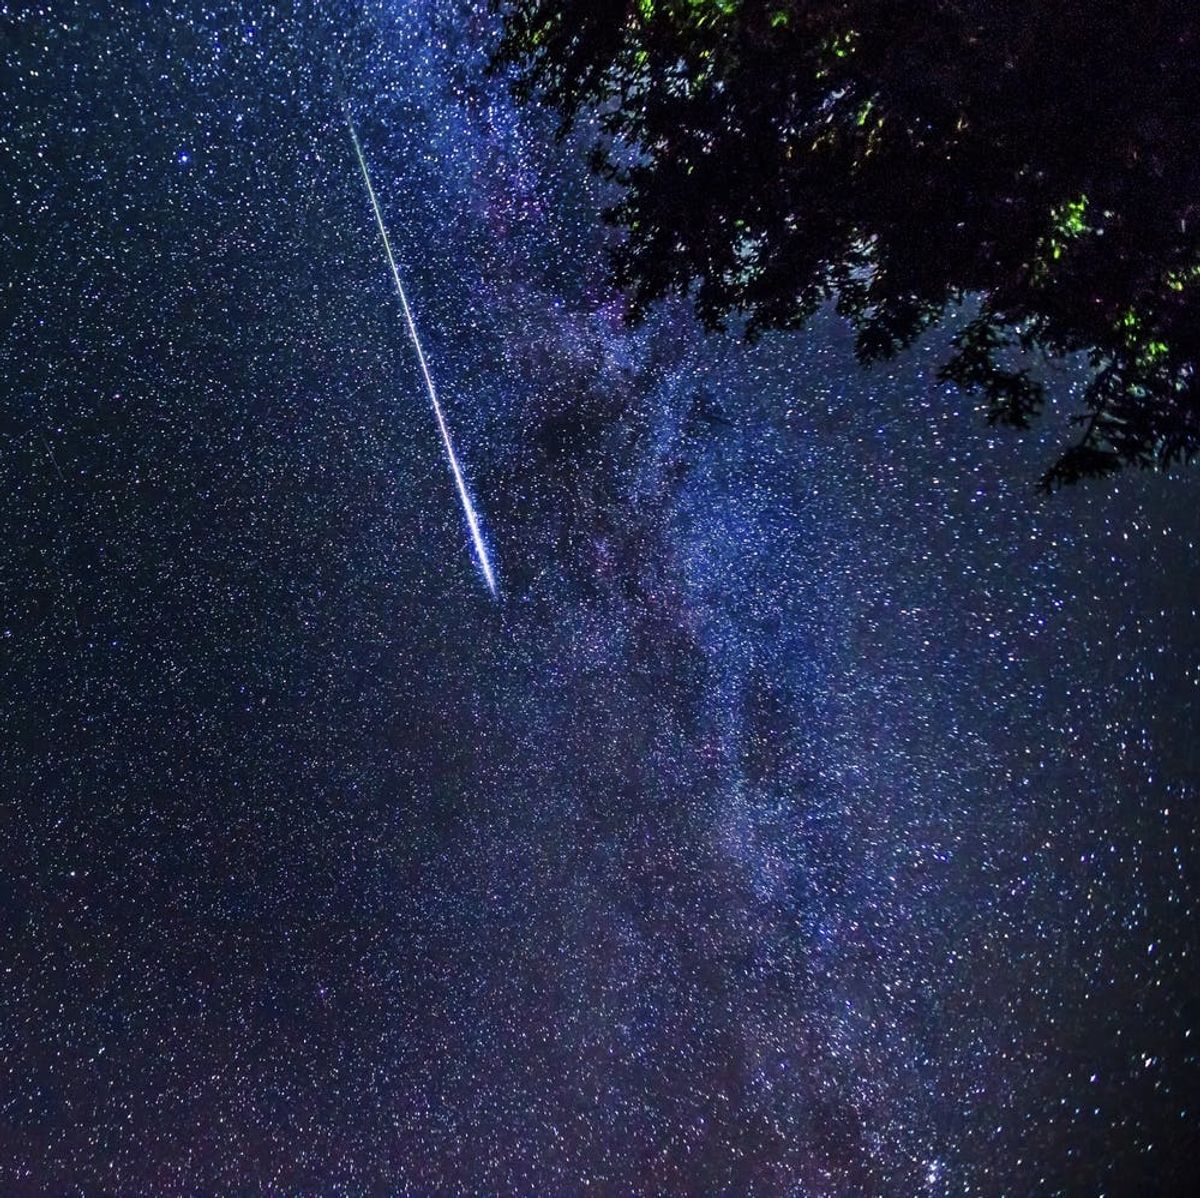 Find Out the Best Time to See the Orionid Meteor Shower Magic